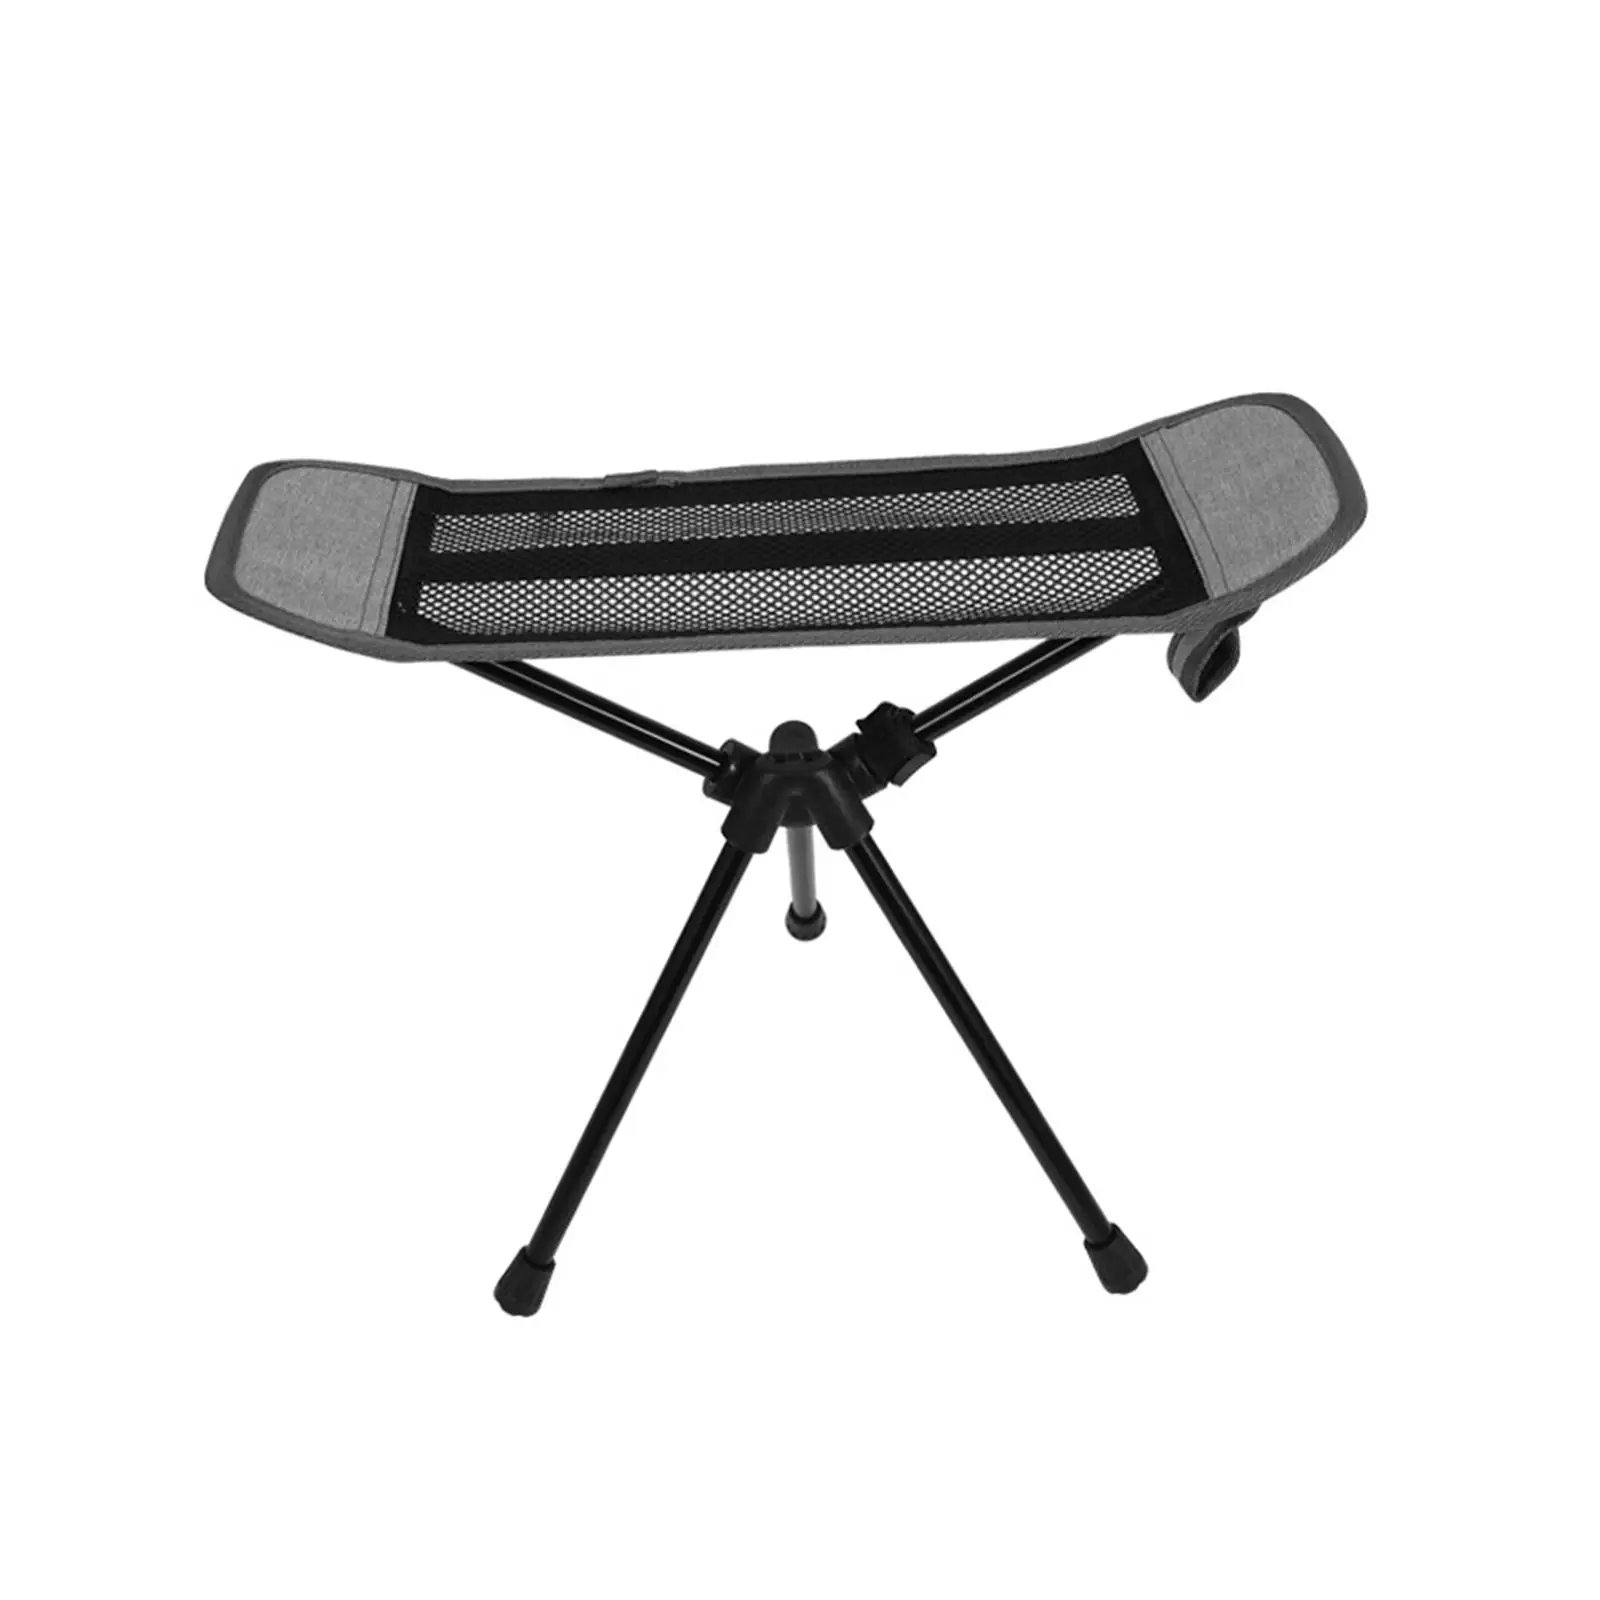 Folding Foot Rest Stool Leg Rest AntiSlip Feet Foot Support Moon Chair Footrest Foldable Camping Chair Footrest for Hiking